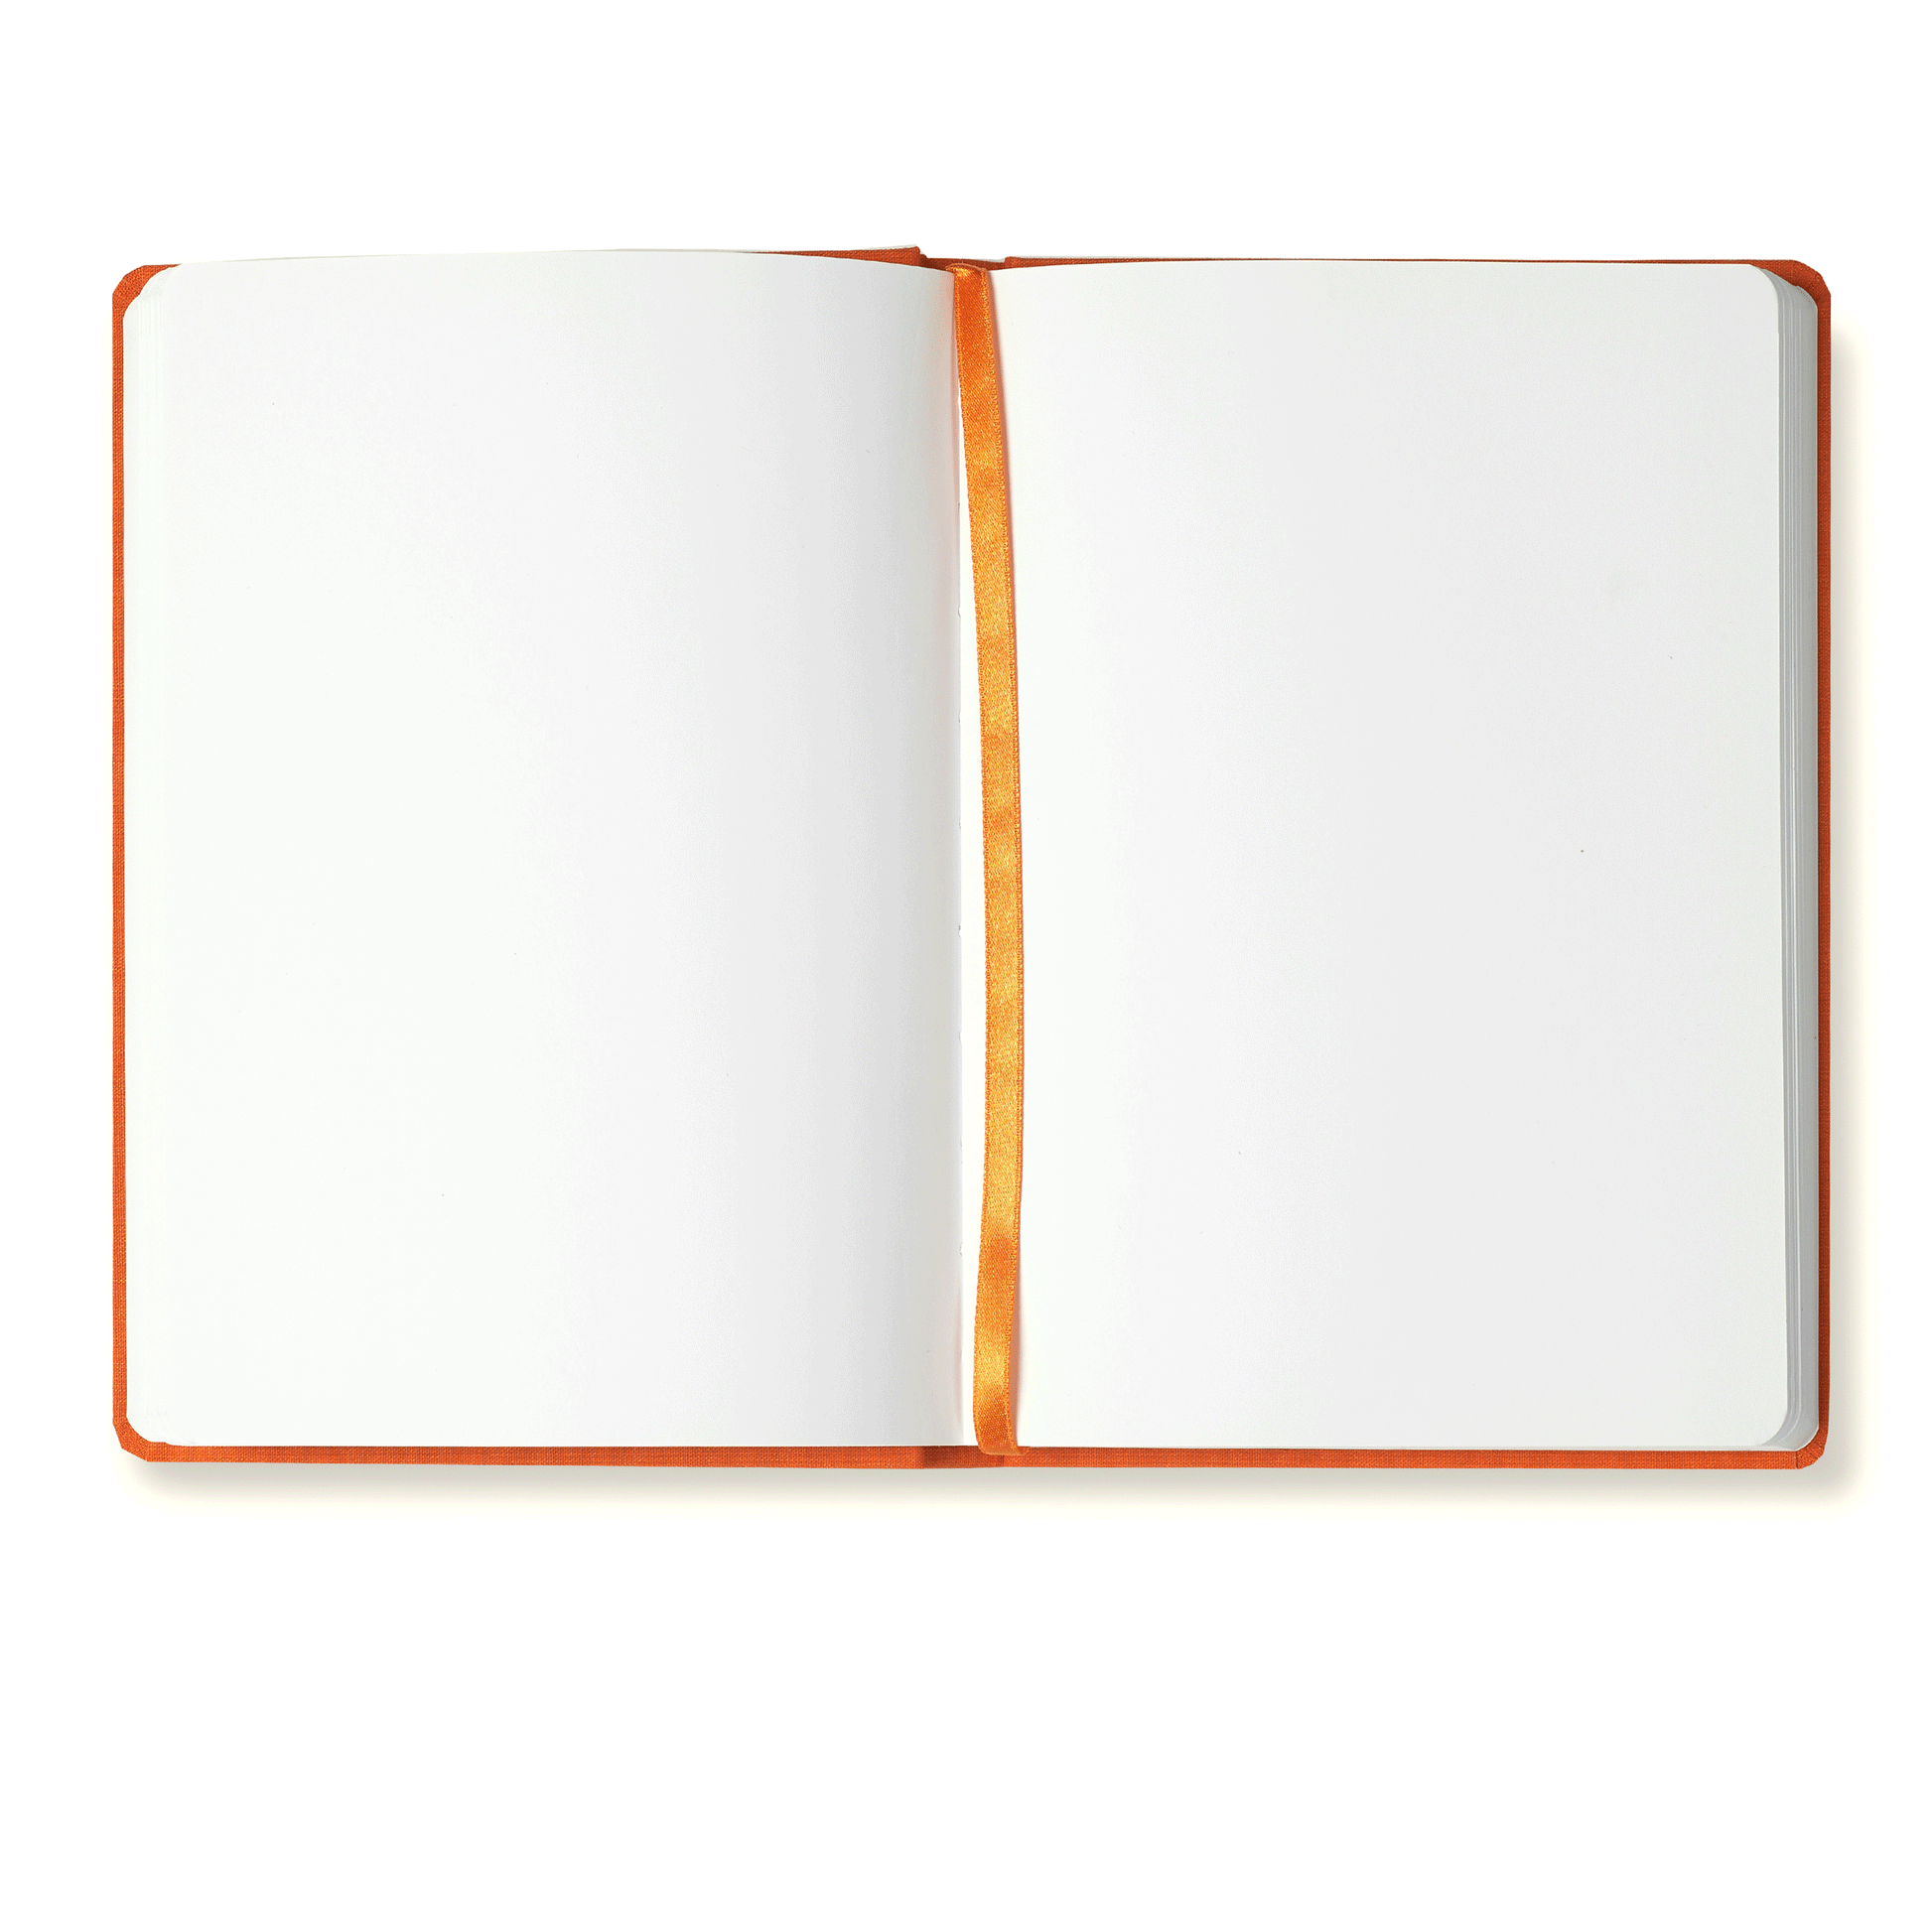 Open notebook showing blank white pages